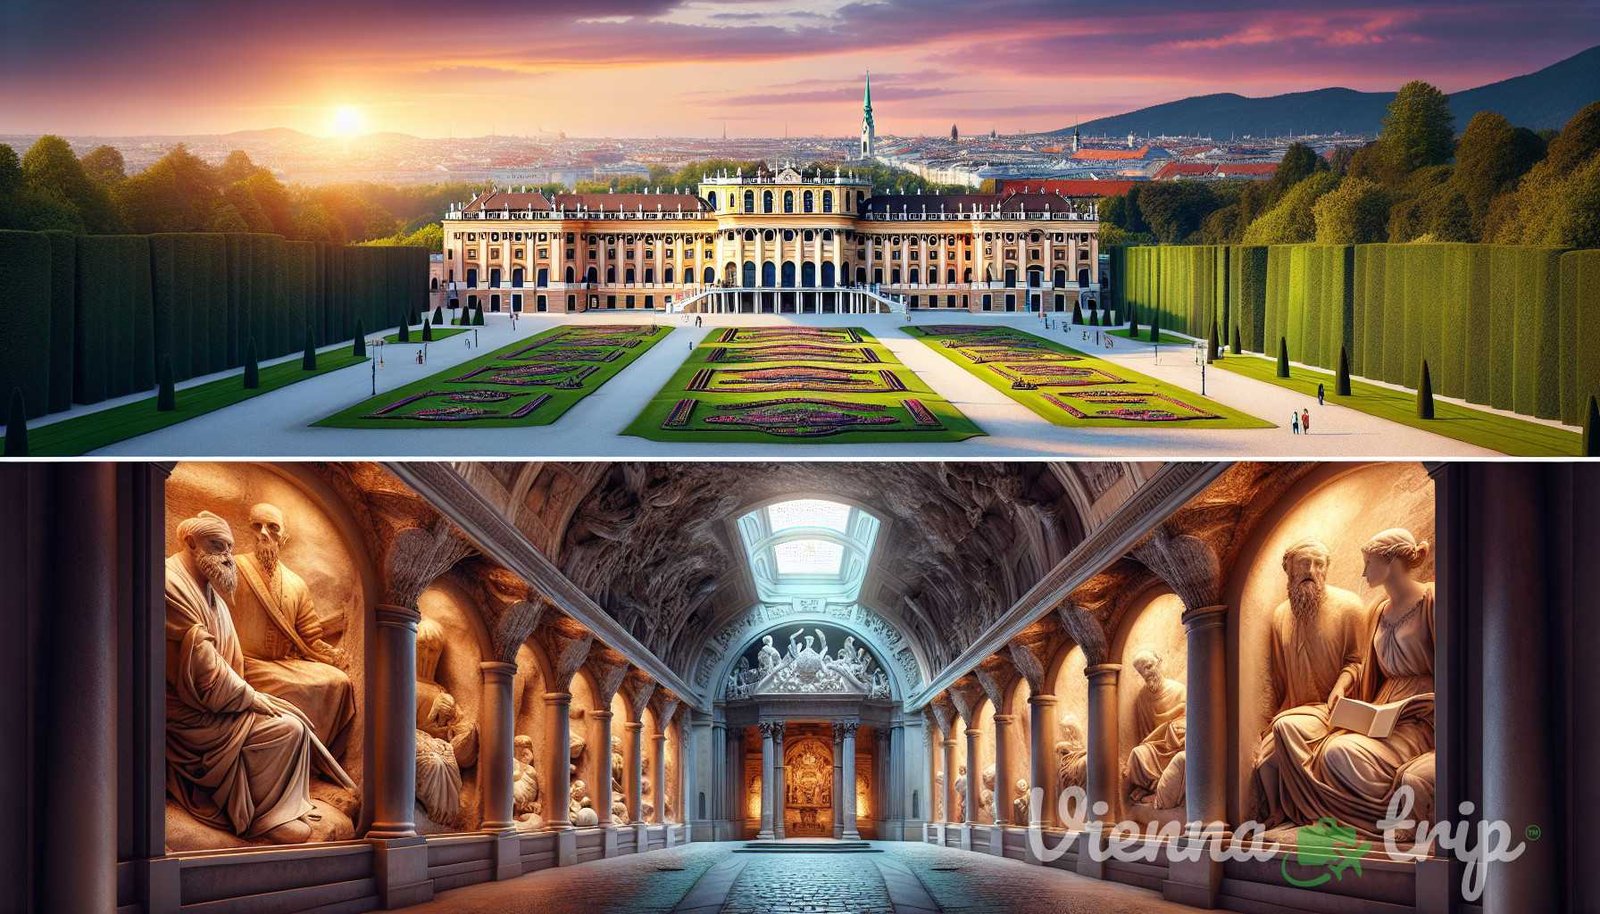 Illustration for section: To learn more about the Schönbrunn Palace and plan your visit, click here to read our detailed arti - viennas secrets